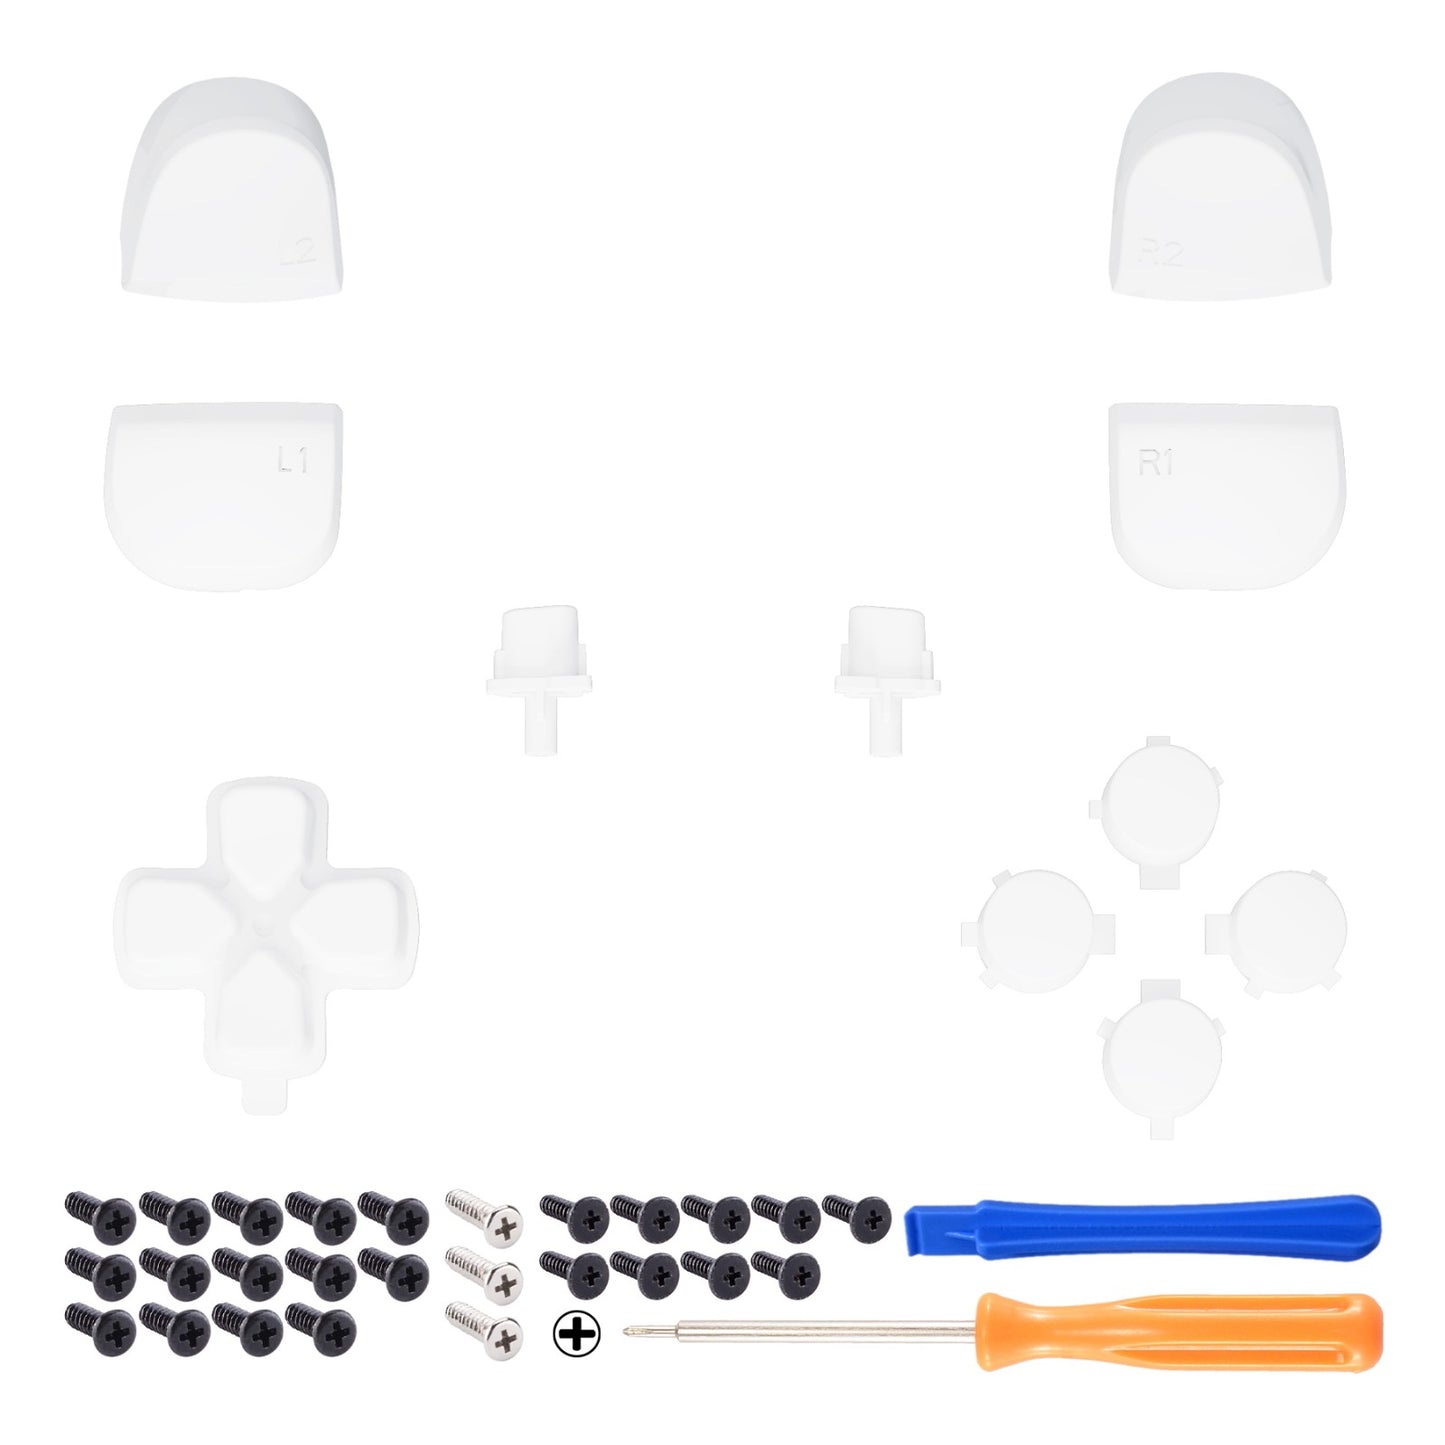 eXtremeRate Retail Replacement D-pad R1 L1 R2 L2 Triggers Share Options Face Buttons, White Full Set Buttons Compatible with ps5 Controller BDM-010 & BDM-020 - JPF1008G2